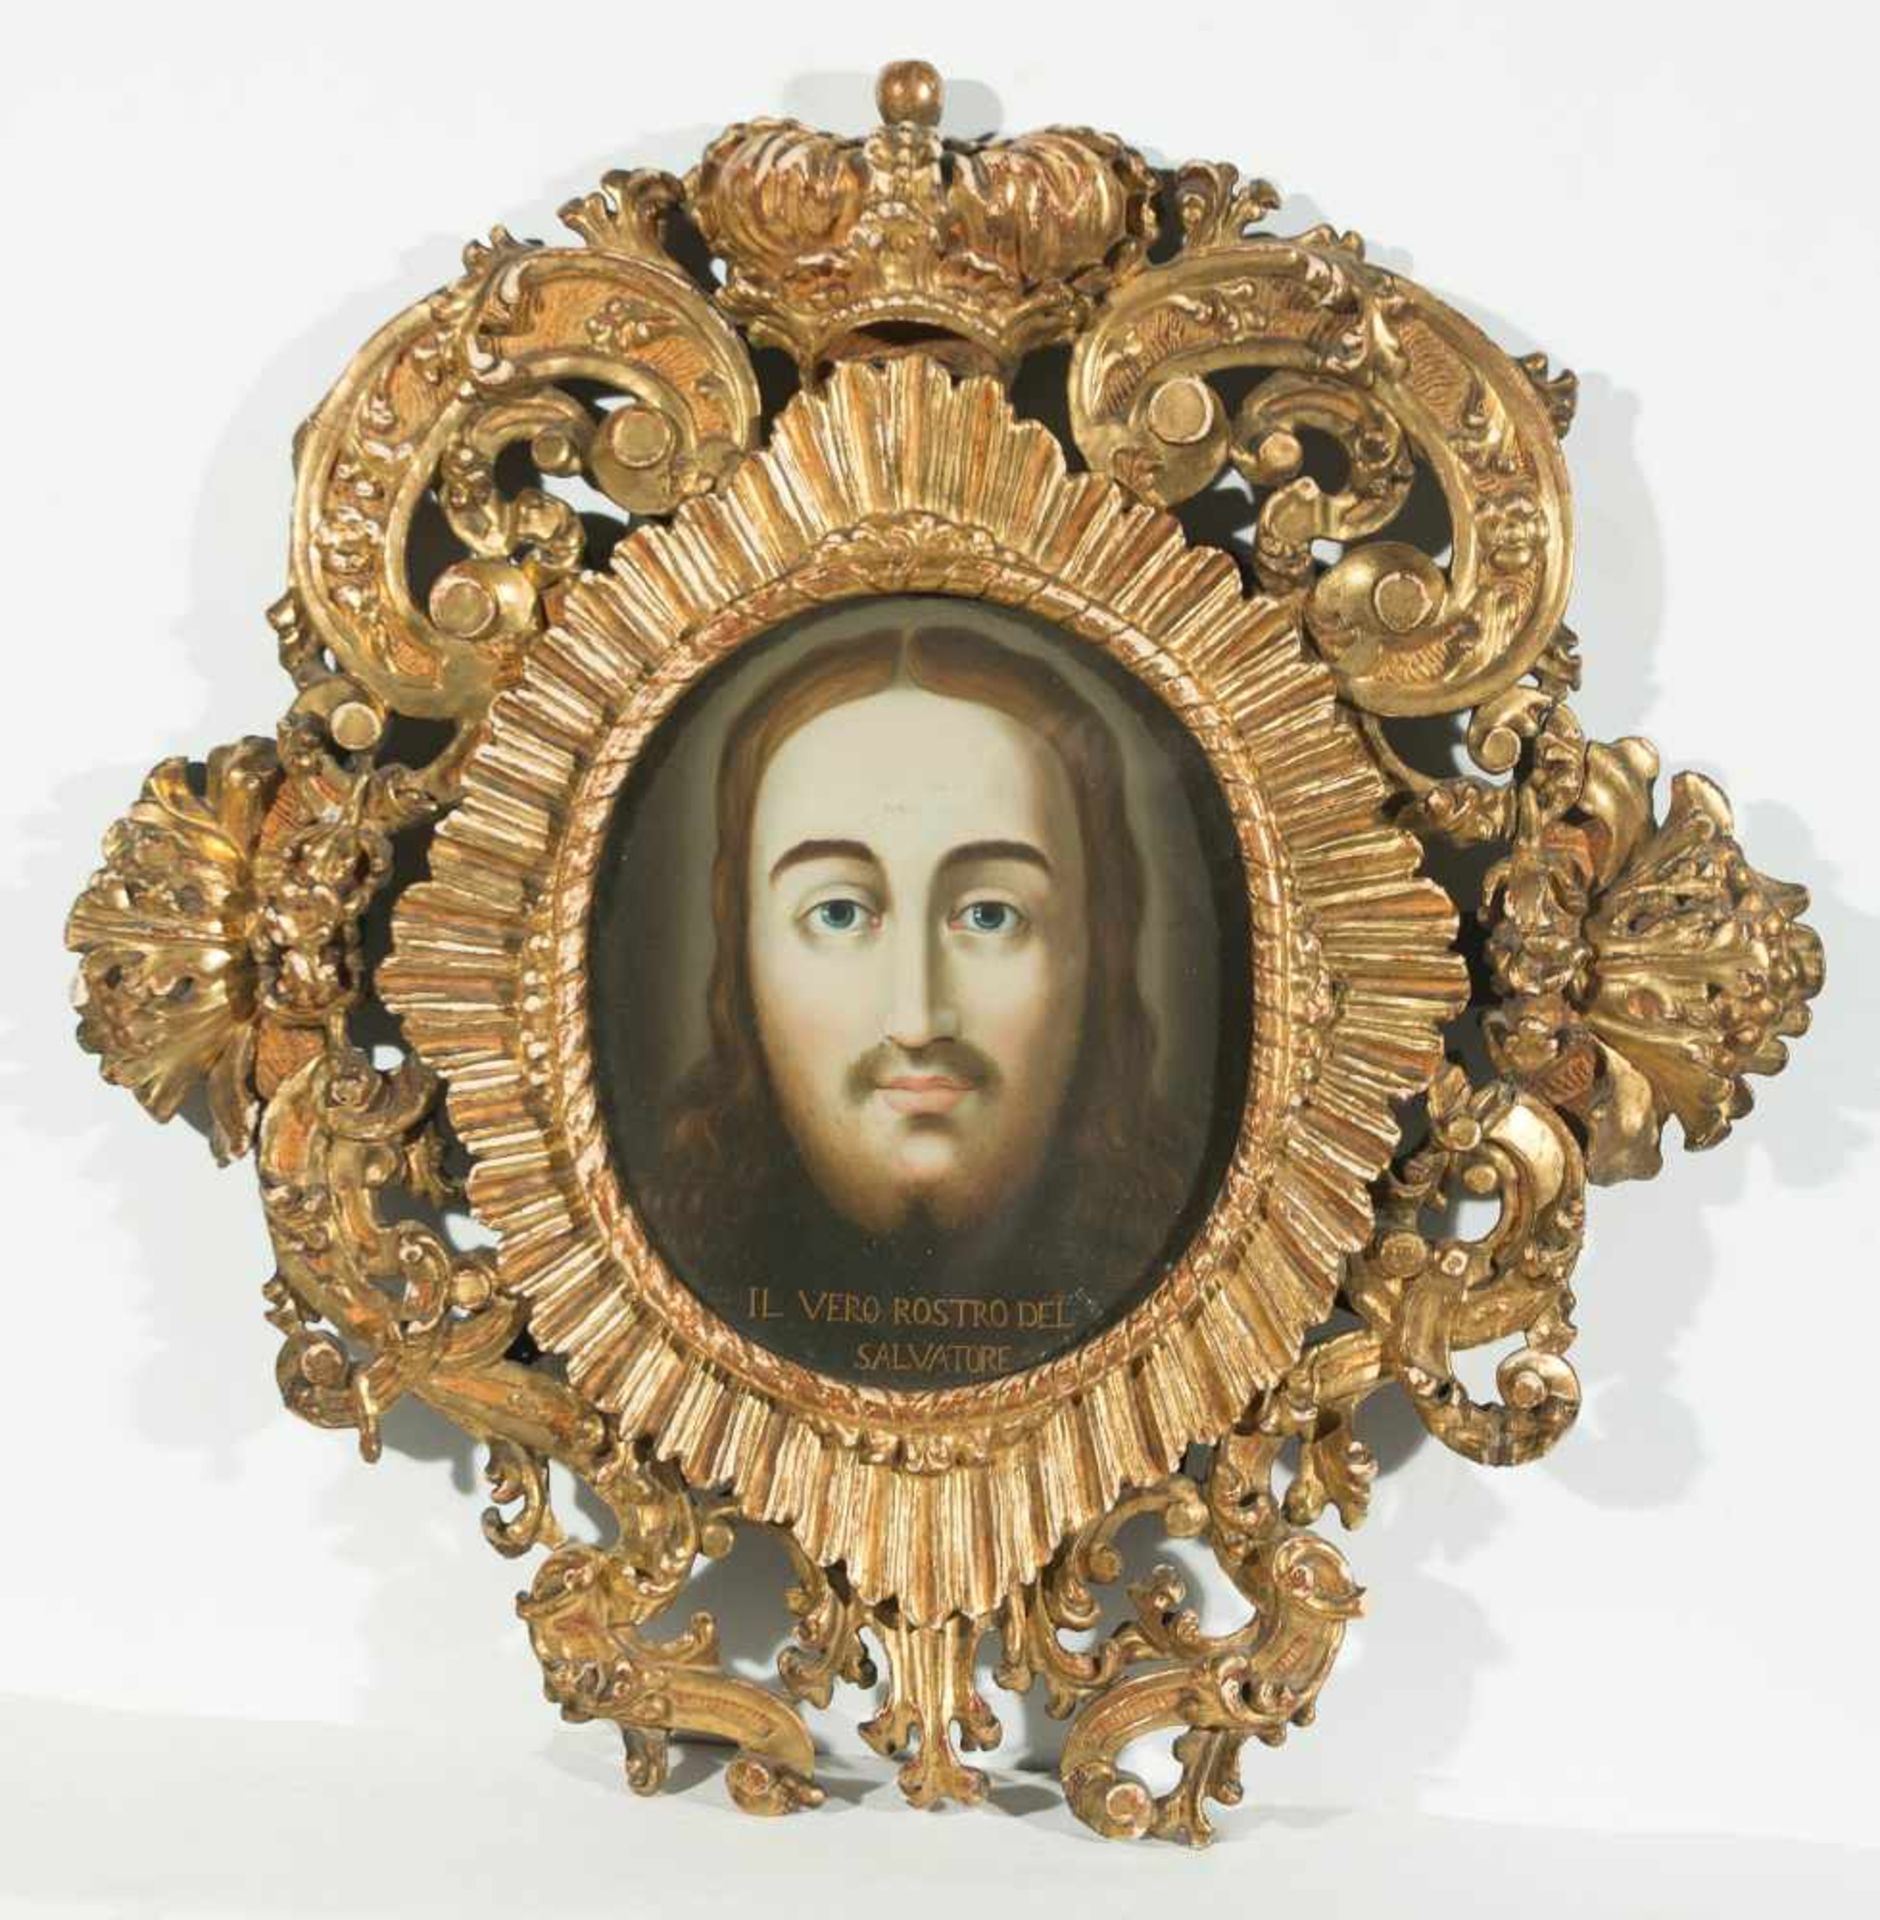 16th century Italian School "Veil of Veronica" Oil on cboard. In an 18th century carved and gilded